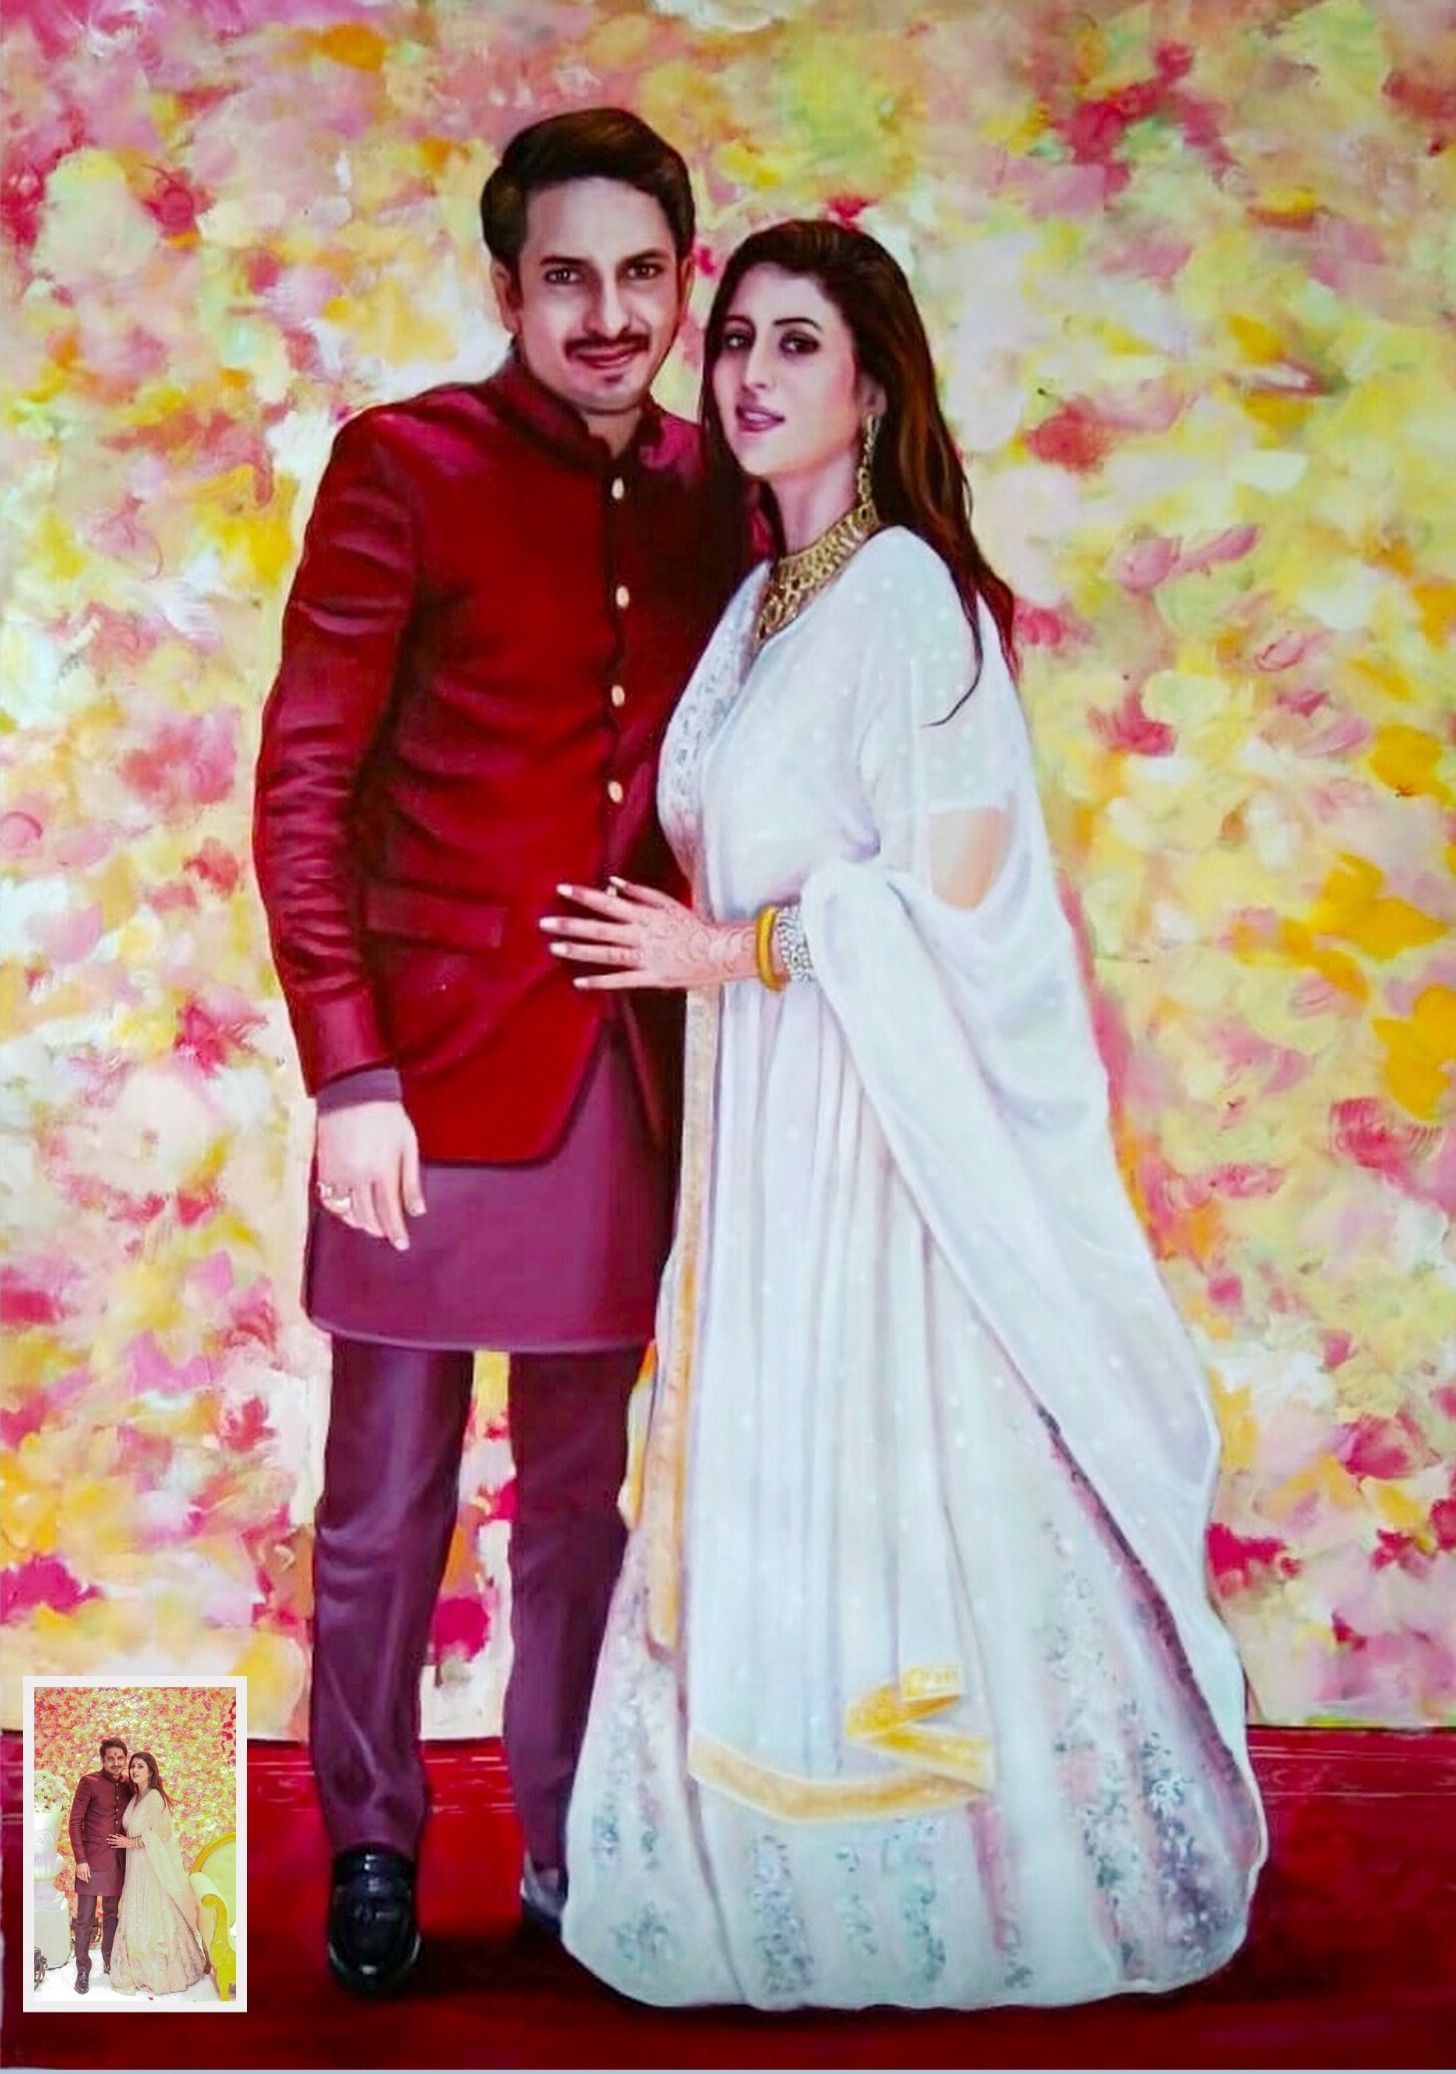 wedding day couple portrait painting, wedding gift ideas, painting from photo, photo to painting,